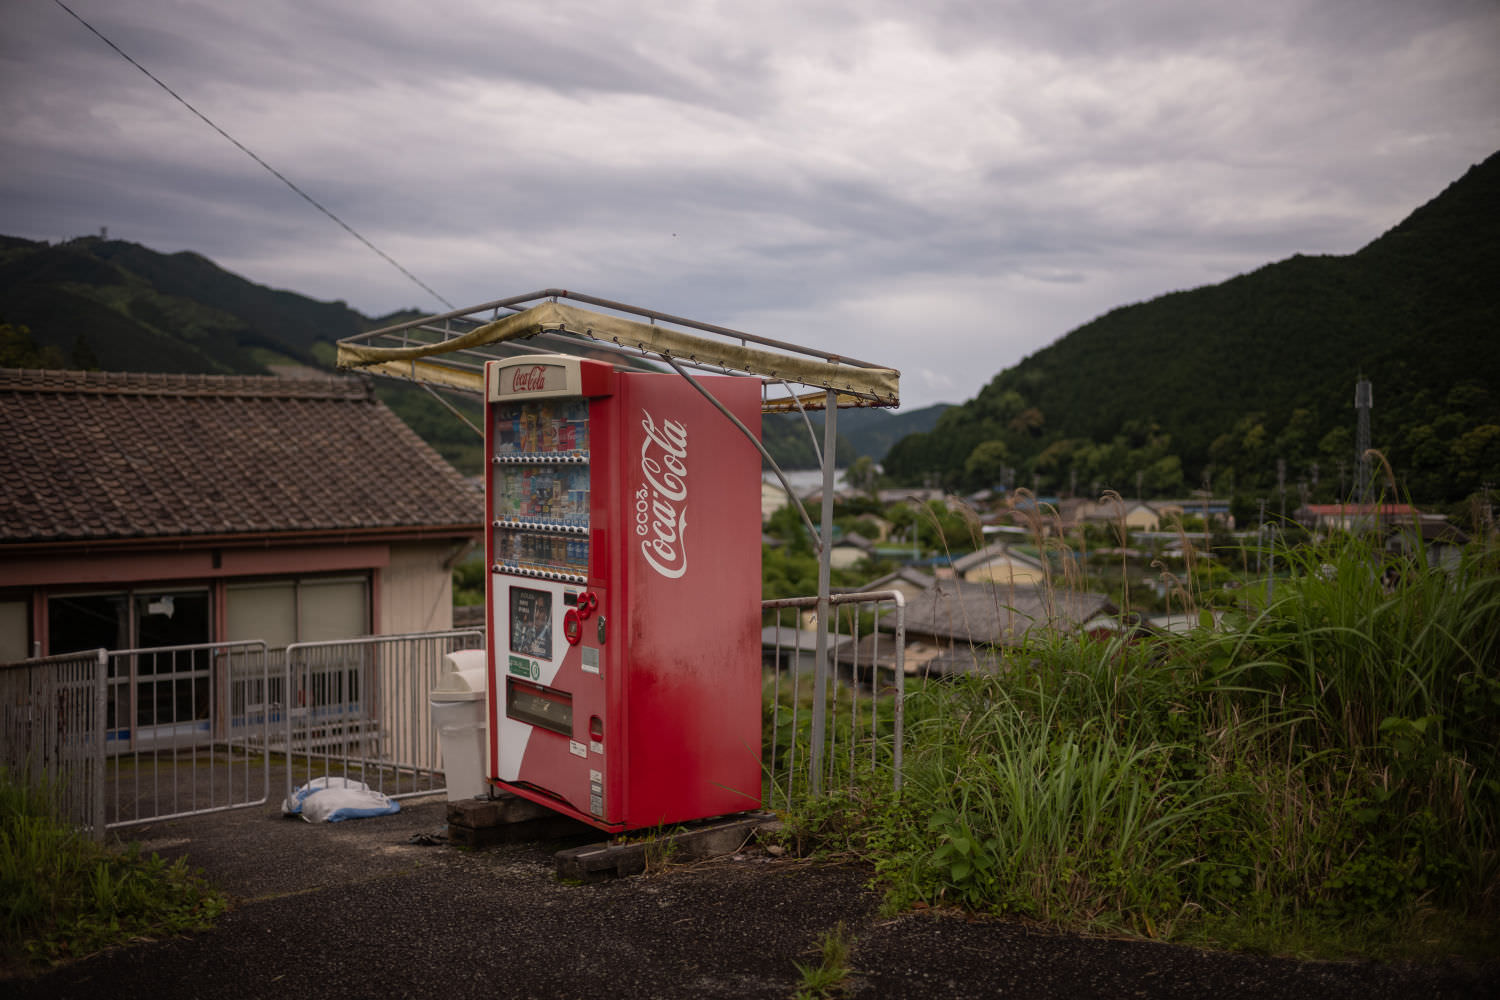 Consider the vending machine lonely on its hill, but, huh, look closely, much delights: Frame once holding up tarp to protect from the elements ripped away by decades of typhoons, now elegant (stitching, gently bent support poles, simple welded joints) crown of sadness for this unsung Hero of Thirst Relief, on side: Roman / Japanese syllabary mix of “ECOる” — roughly, “to Eco,” “to be Eco-friendly,” one assumes of the machine itself, algorithmic energy use for the benefit of earth, drinks cold but ethically cold — raised on concrete stilts to be perfectly even (straight bottle drops, no hangs), weeds to the right unkempt (but pleasant), but recycling pails (ECOる?) to left for cans and bottles in fine shape, sandbags holding half of small fence in place leading down to … a home? a shed? something uninhabited, and in the distance, the bay, small farming village of Mikisato flanked by mountain passes, unseen but heard: Colossal trucks rumbling back and forth carrying chopped wood and gravel from worksites up and down the coast.
